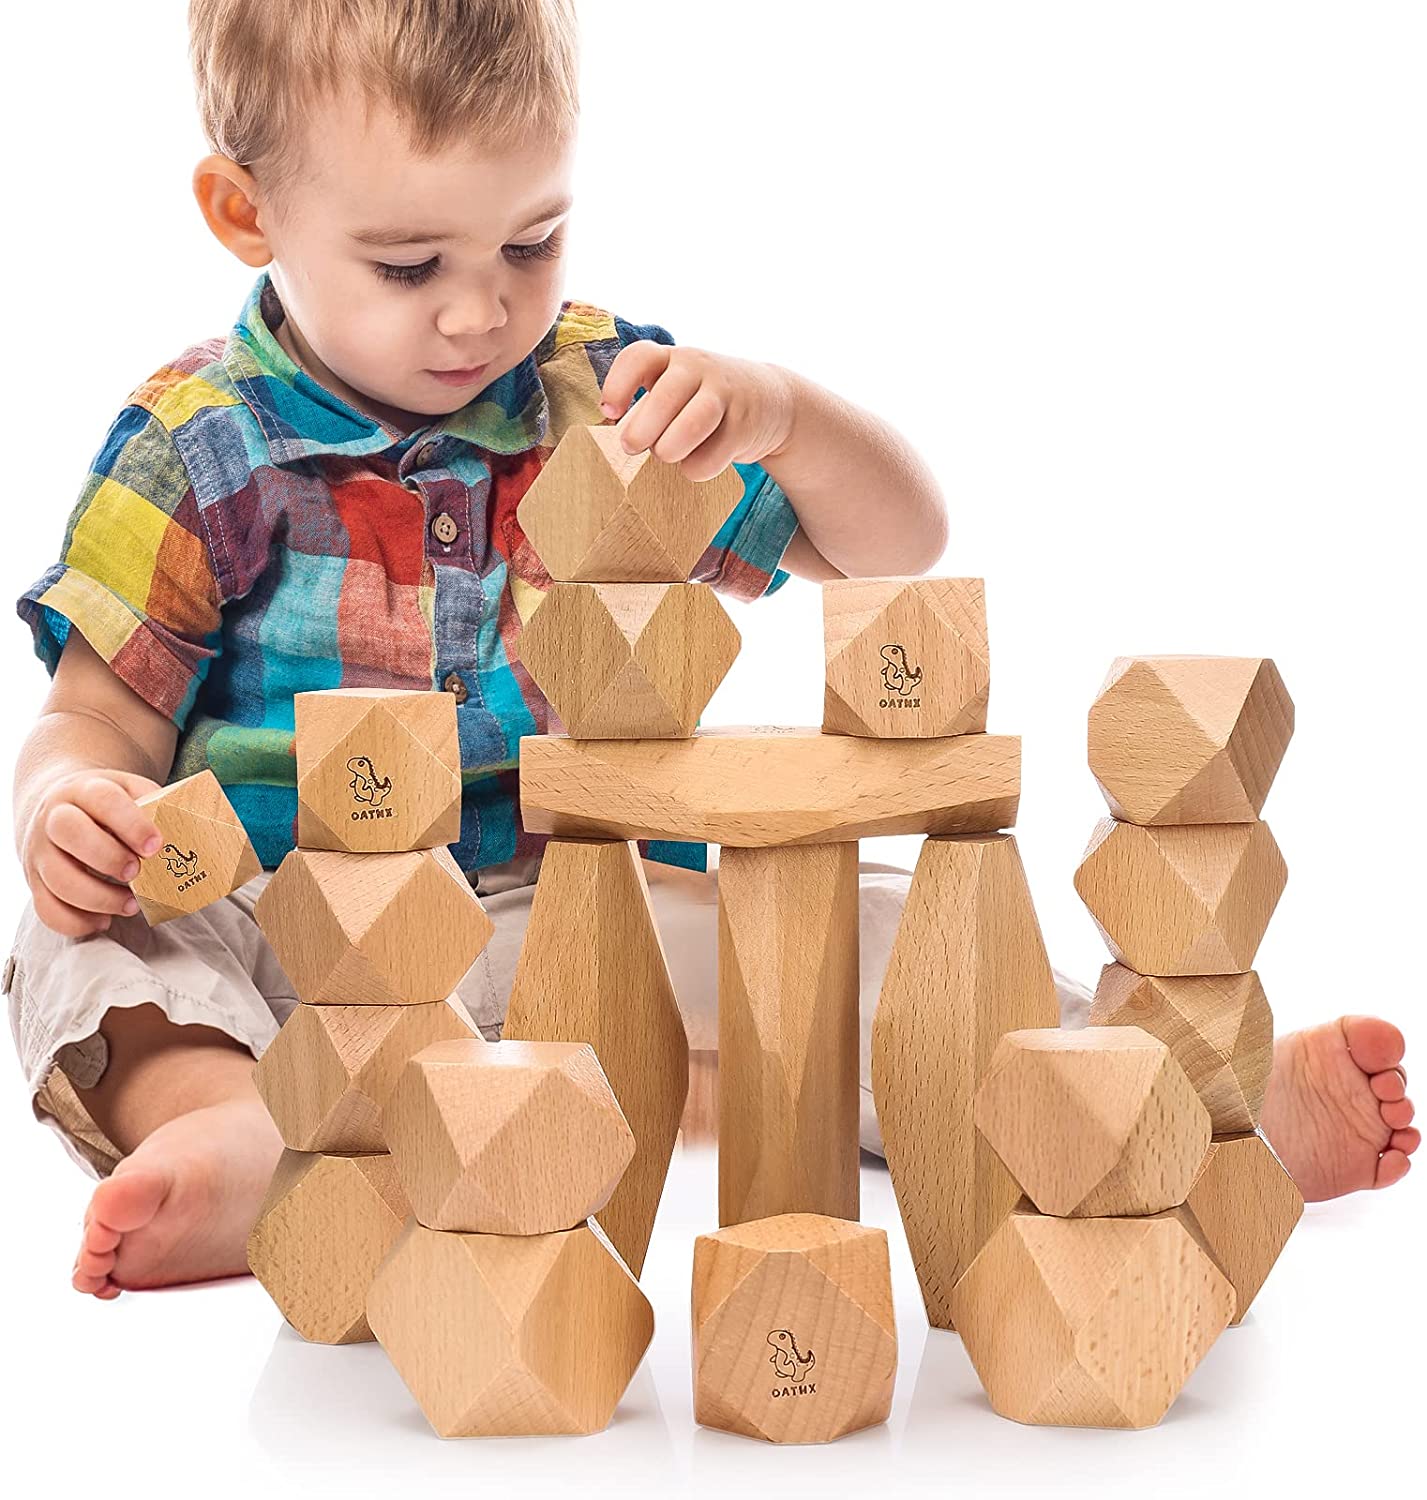 Open Ended Toys 9 Pc Wood Balancing Stones Set PERCHED Natural Stacking Rocks Wooden Blocks Montessori Puzzle Game 